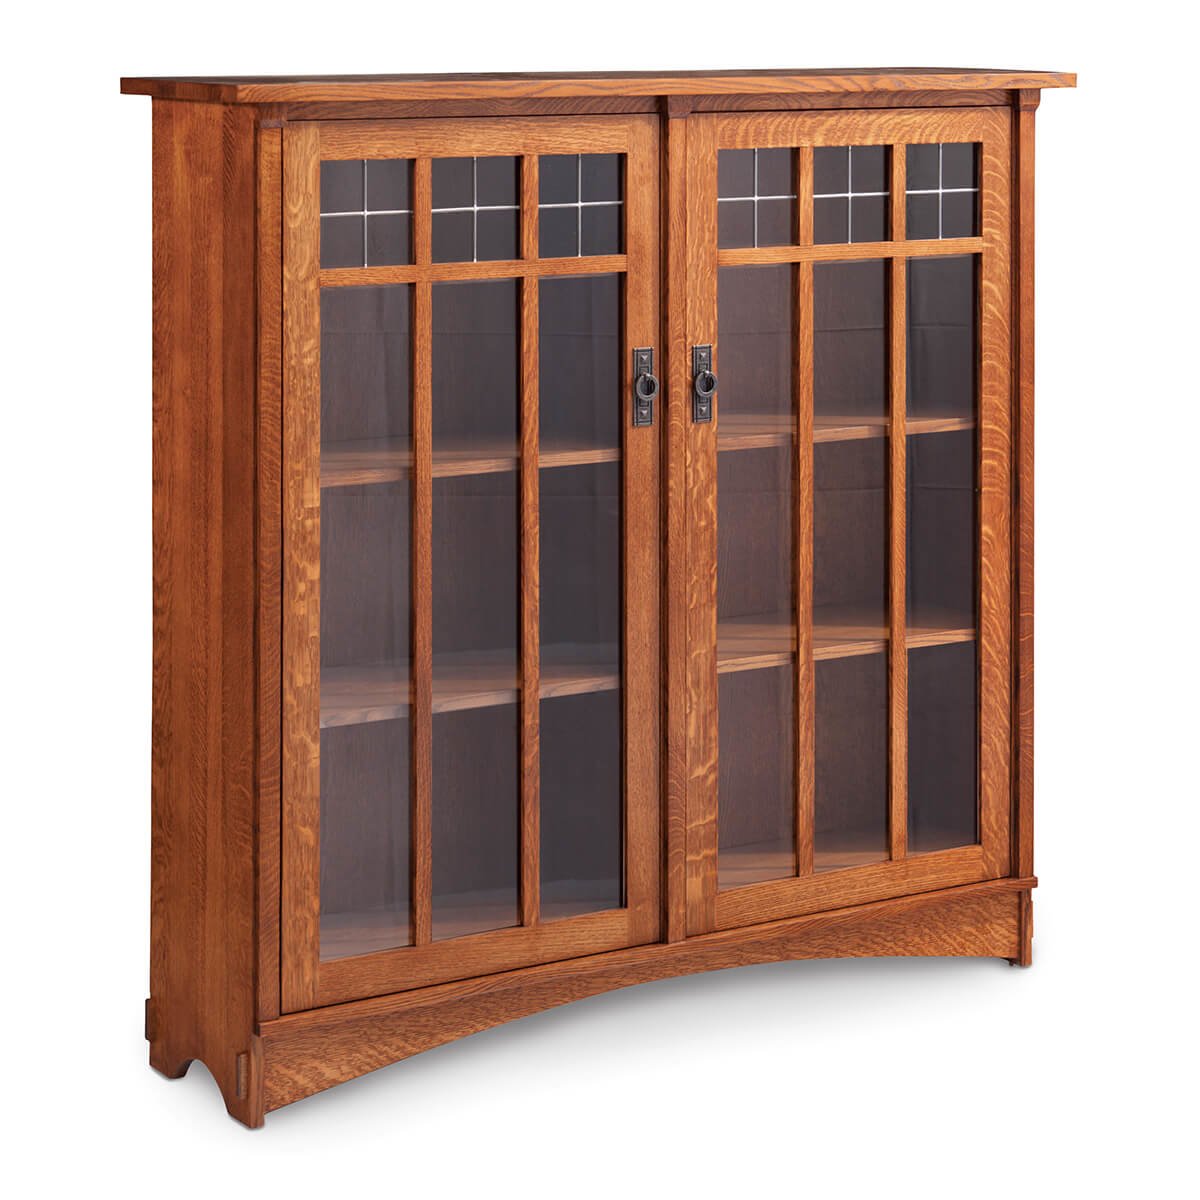 Read more about the article Bungalow 2-Door Bookcase